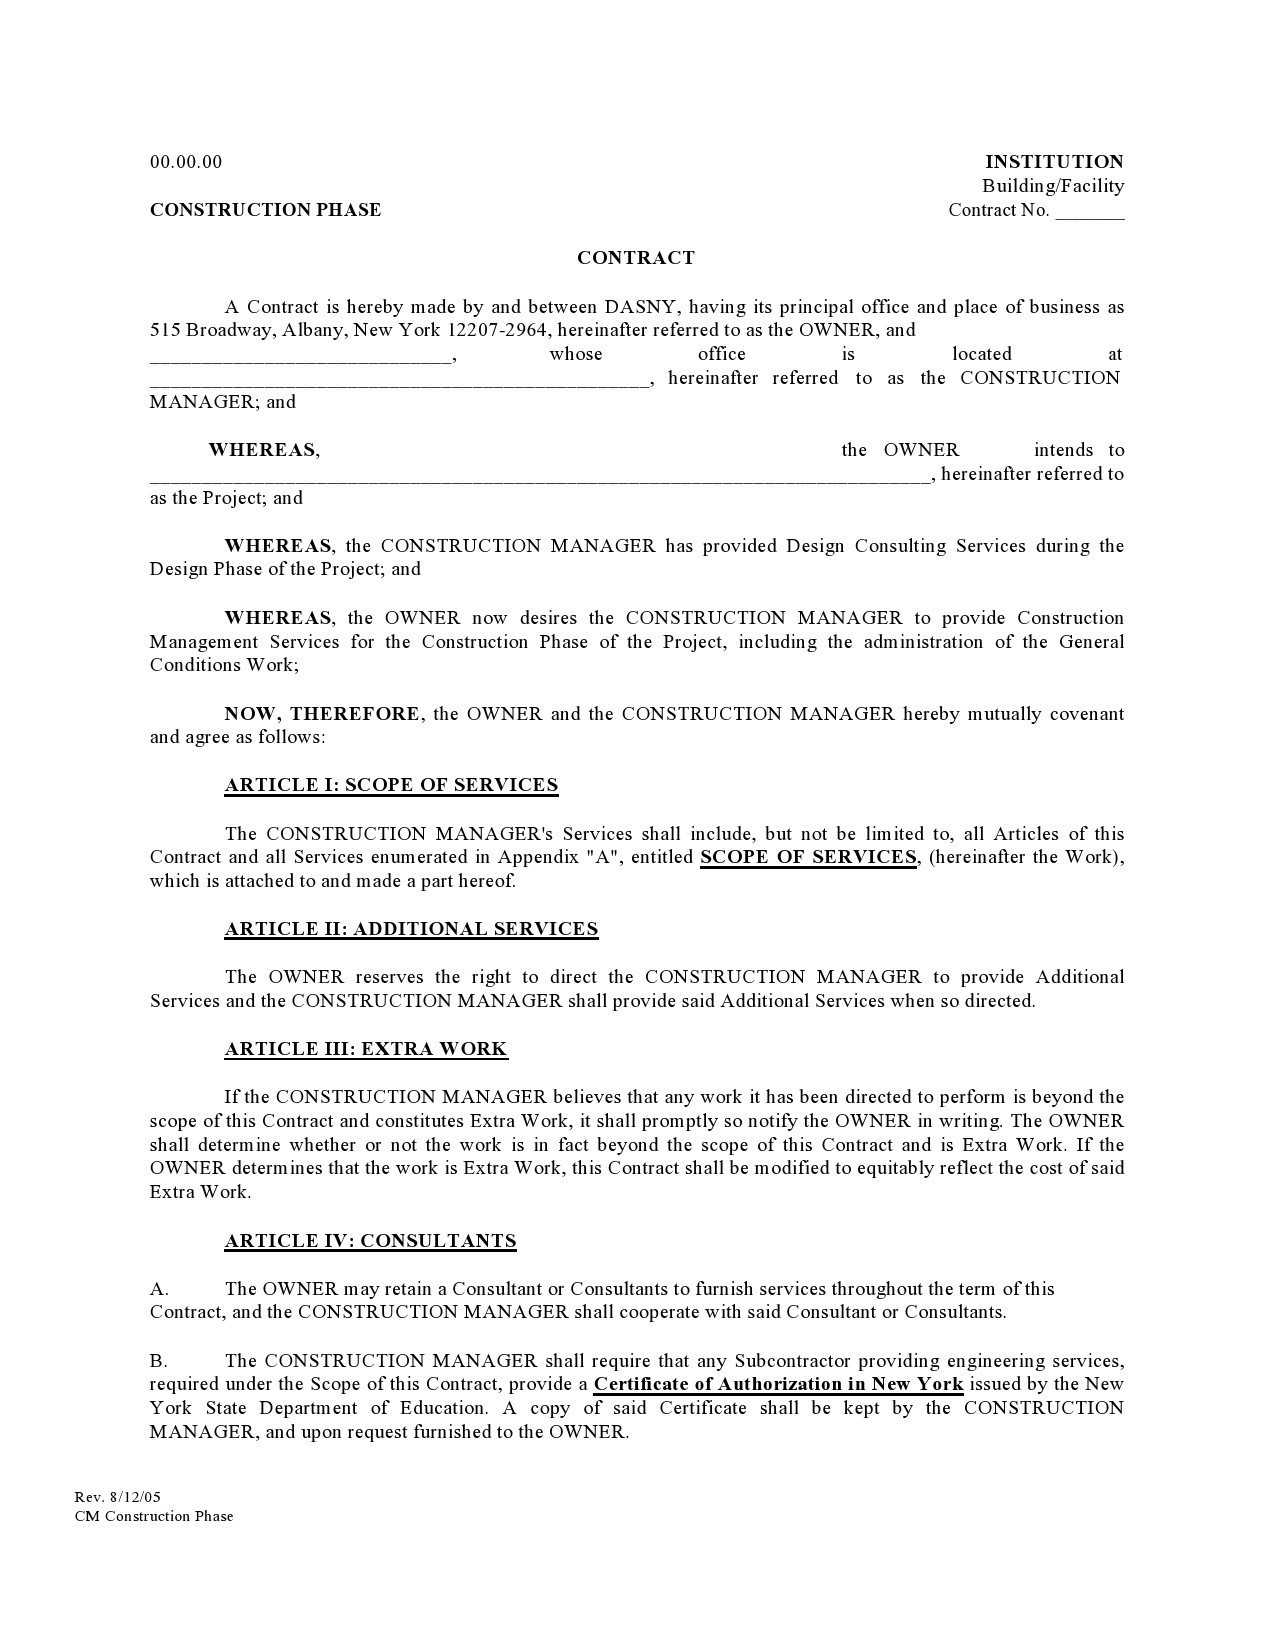 Free construction contract agreement 30